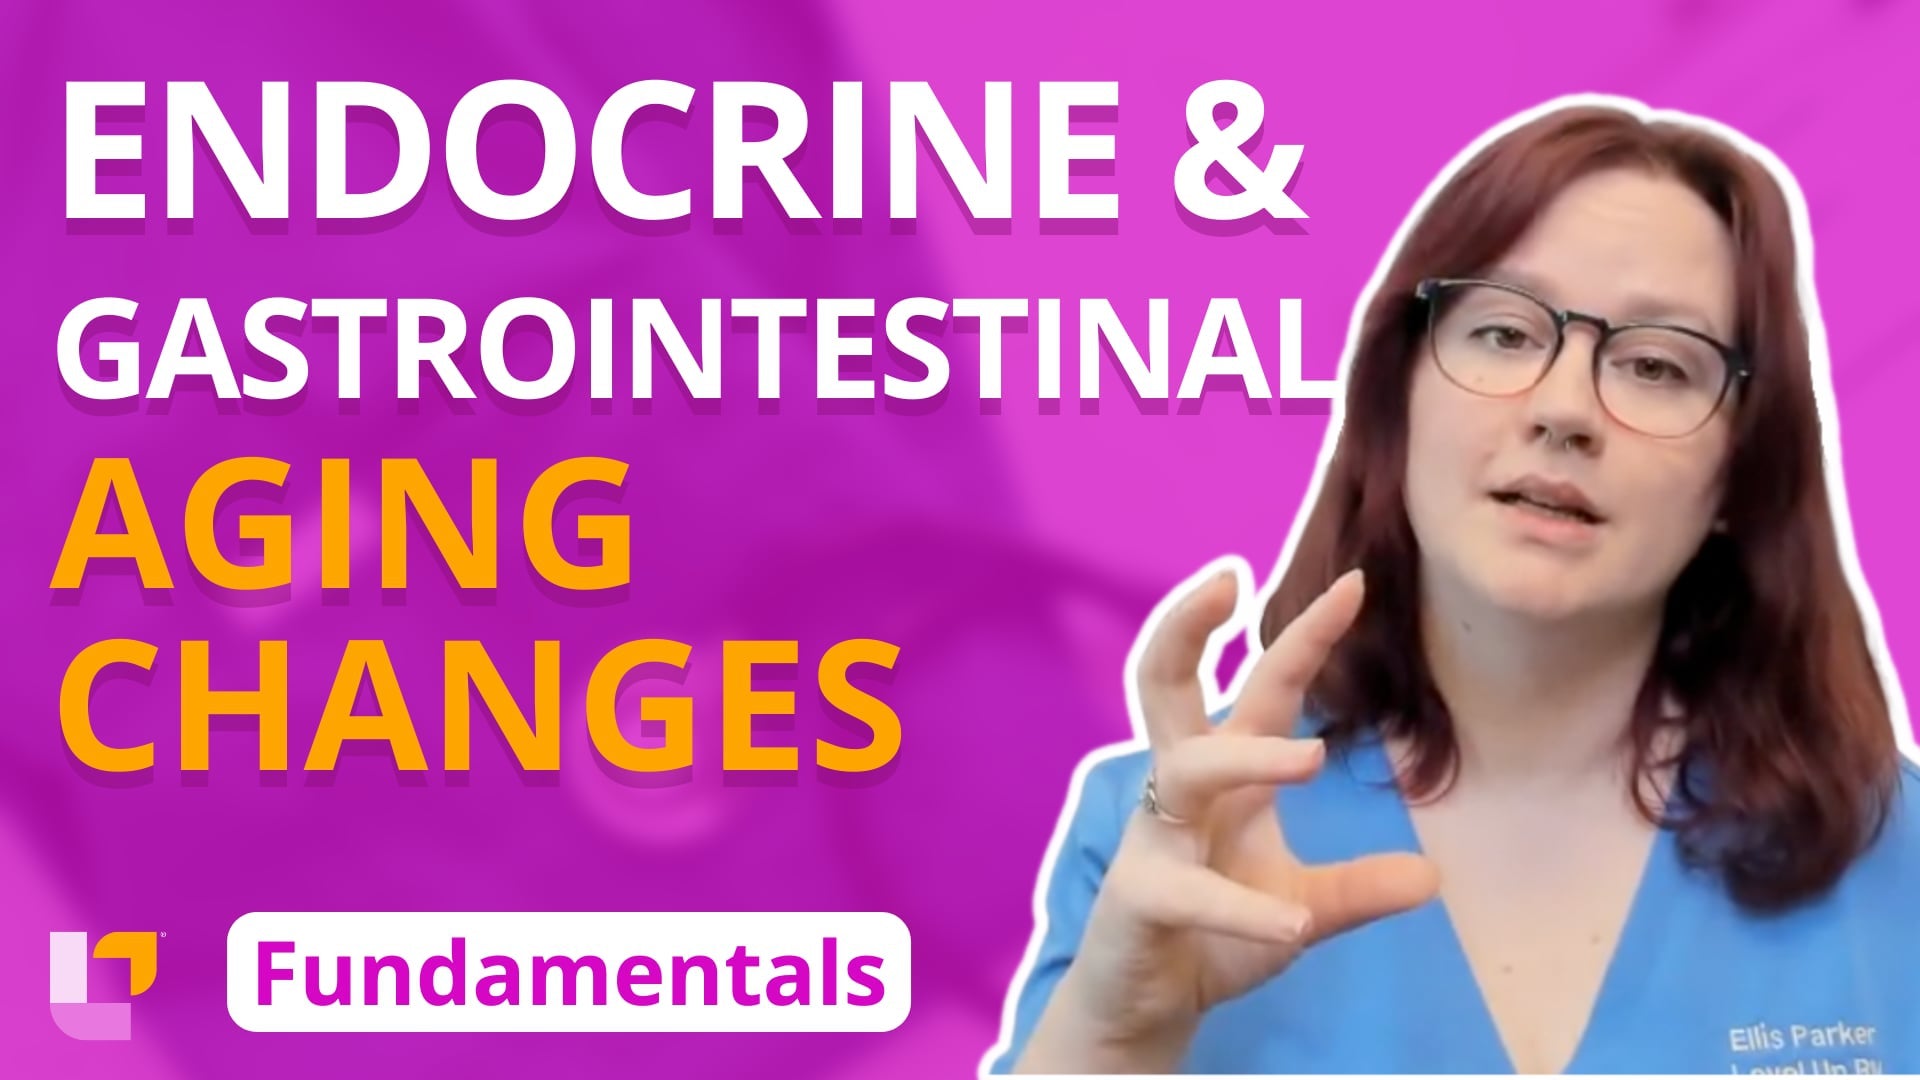 Fundamentals - Gerontology, part 4: Endocrine and Gastrointestinal Changes in Aging Adults - LevelUpRN